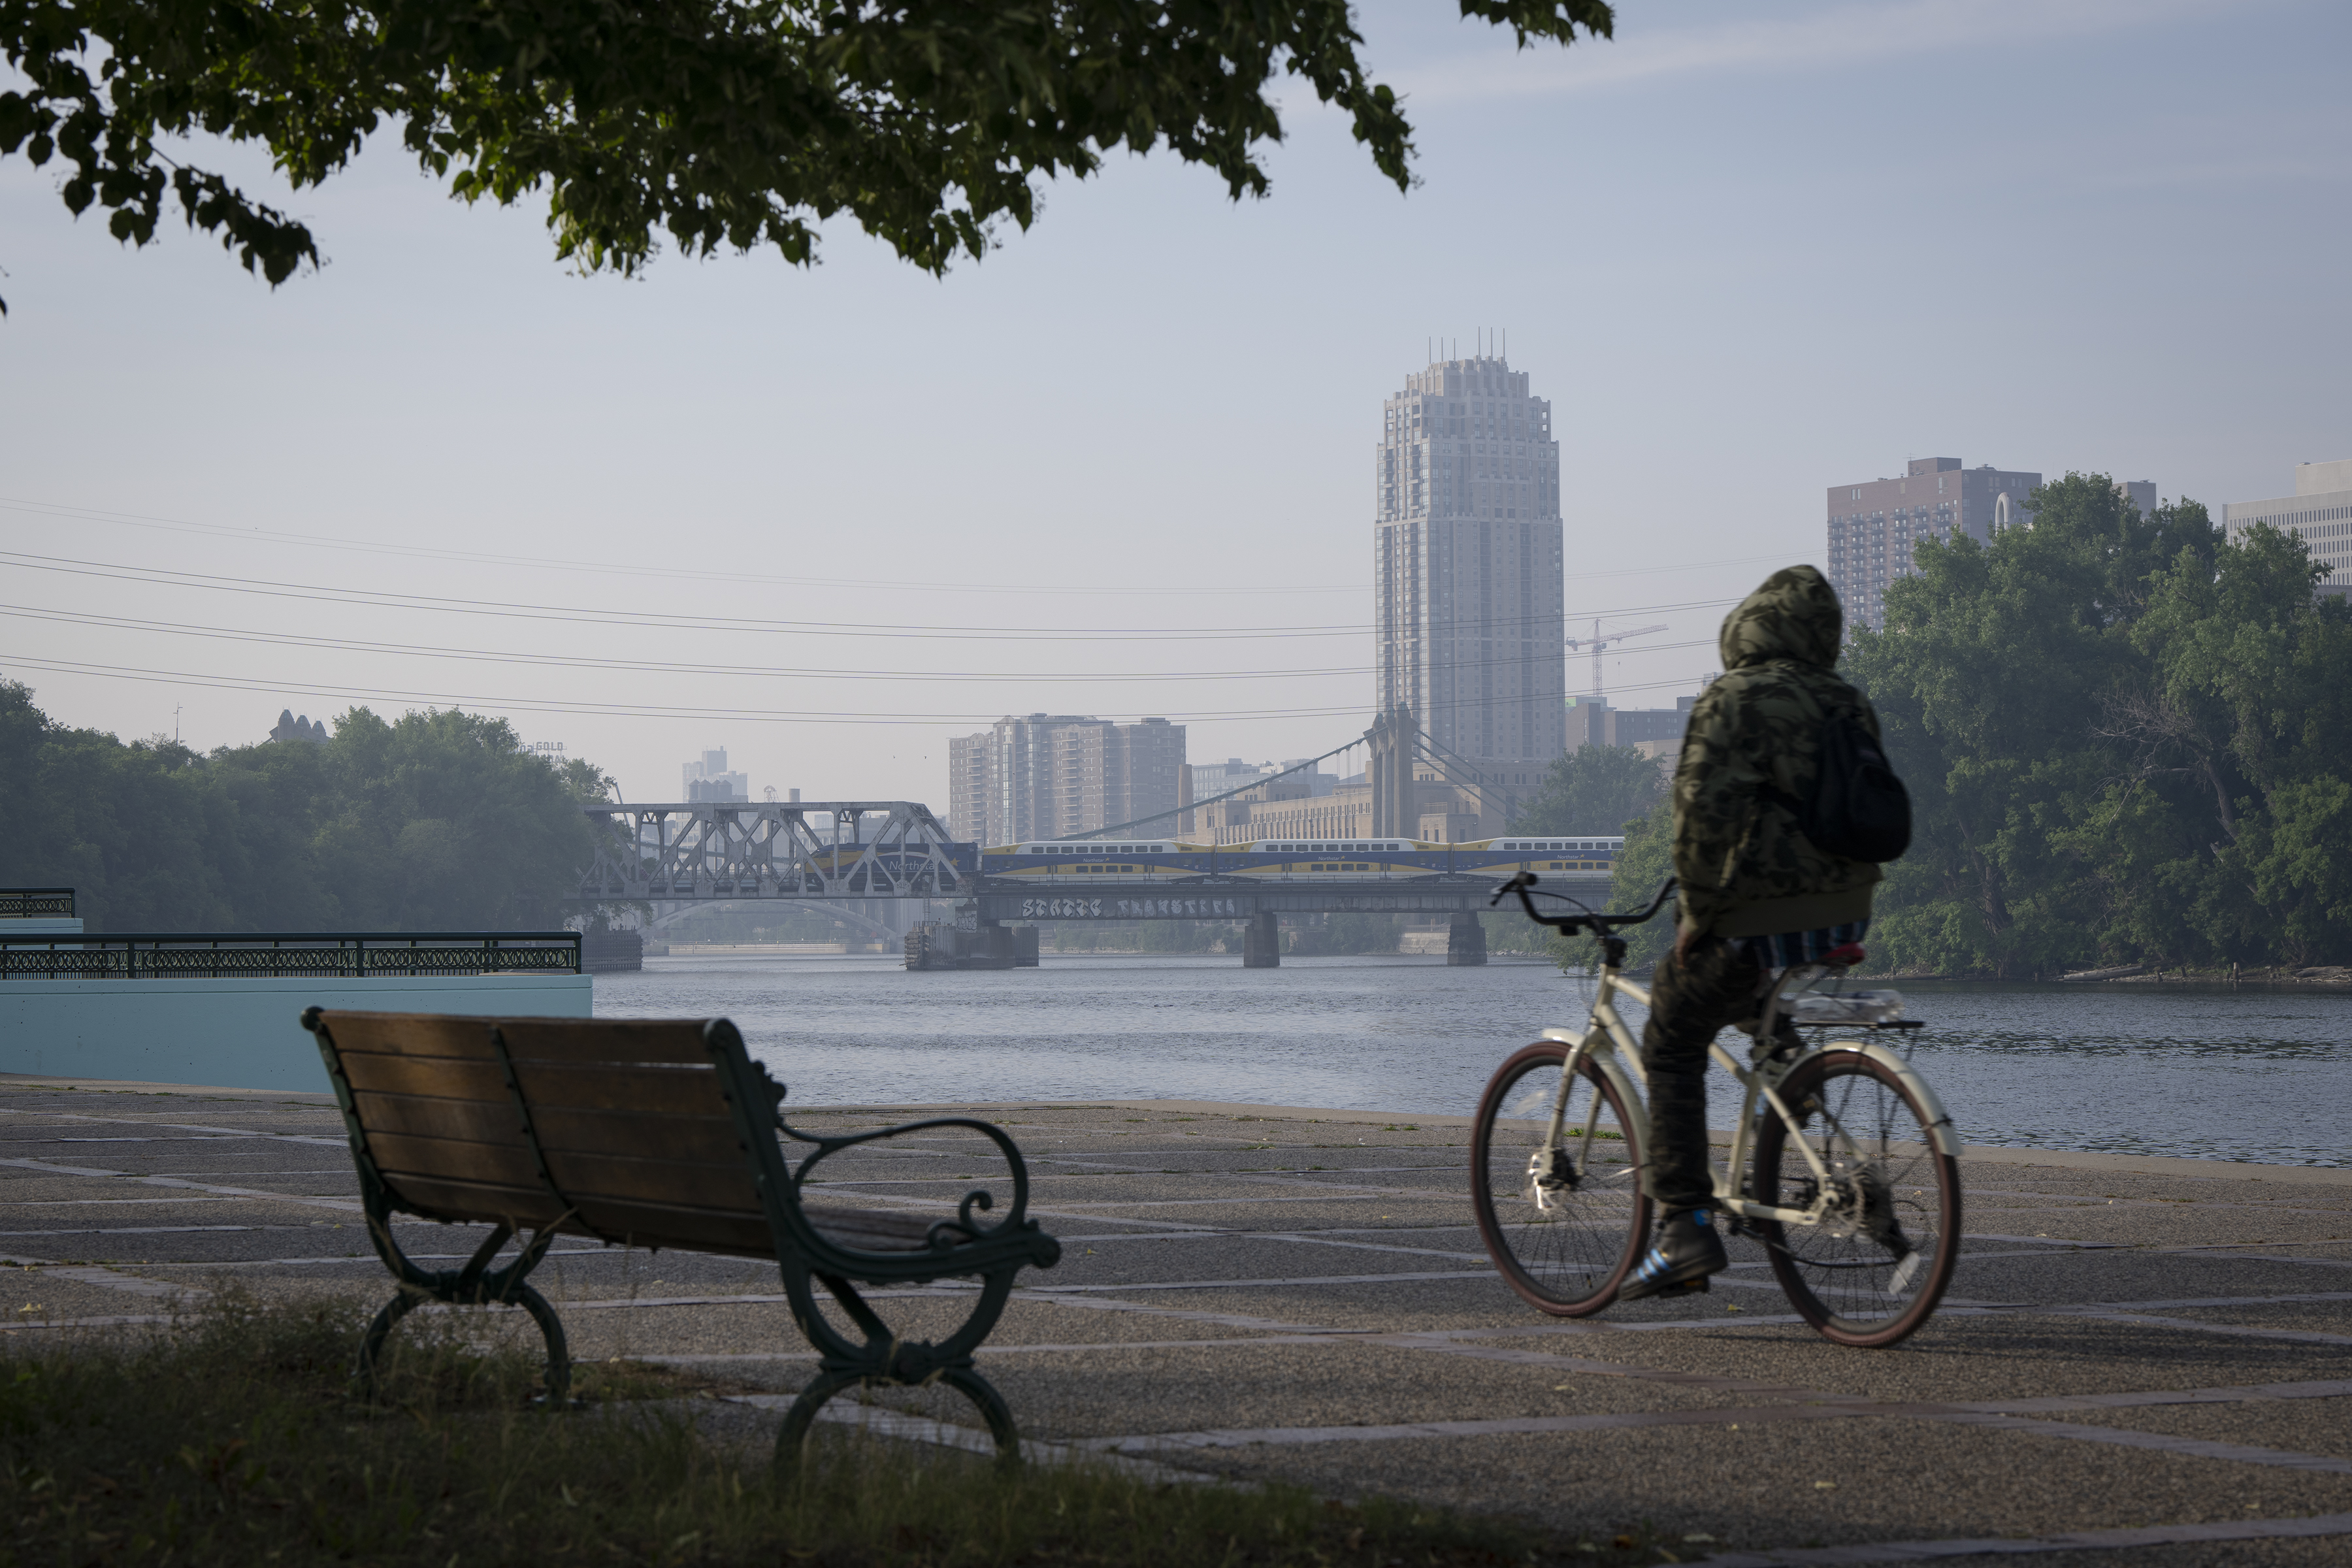 A person on their bicycle cycling by the river